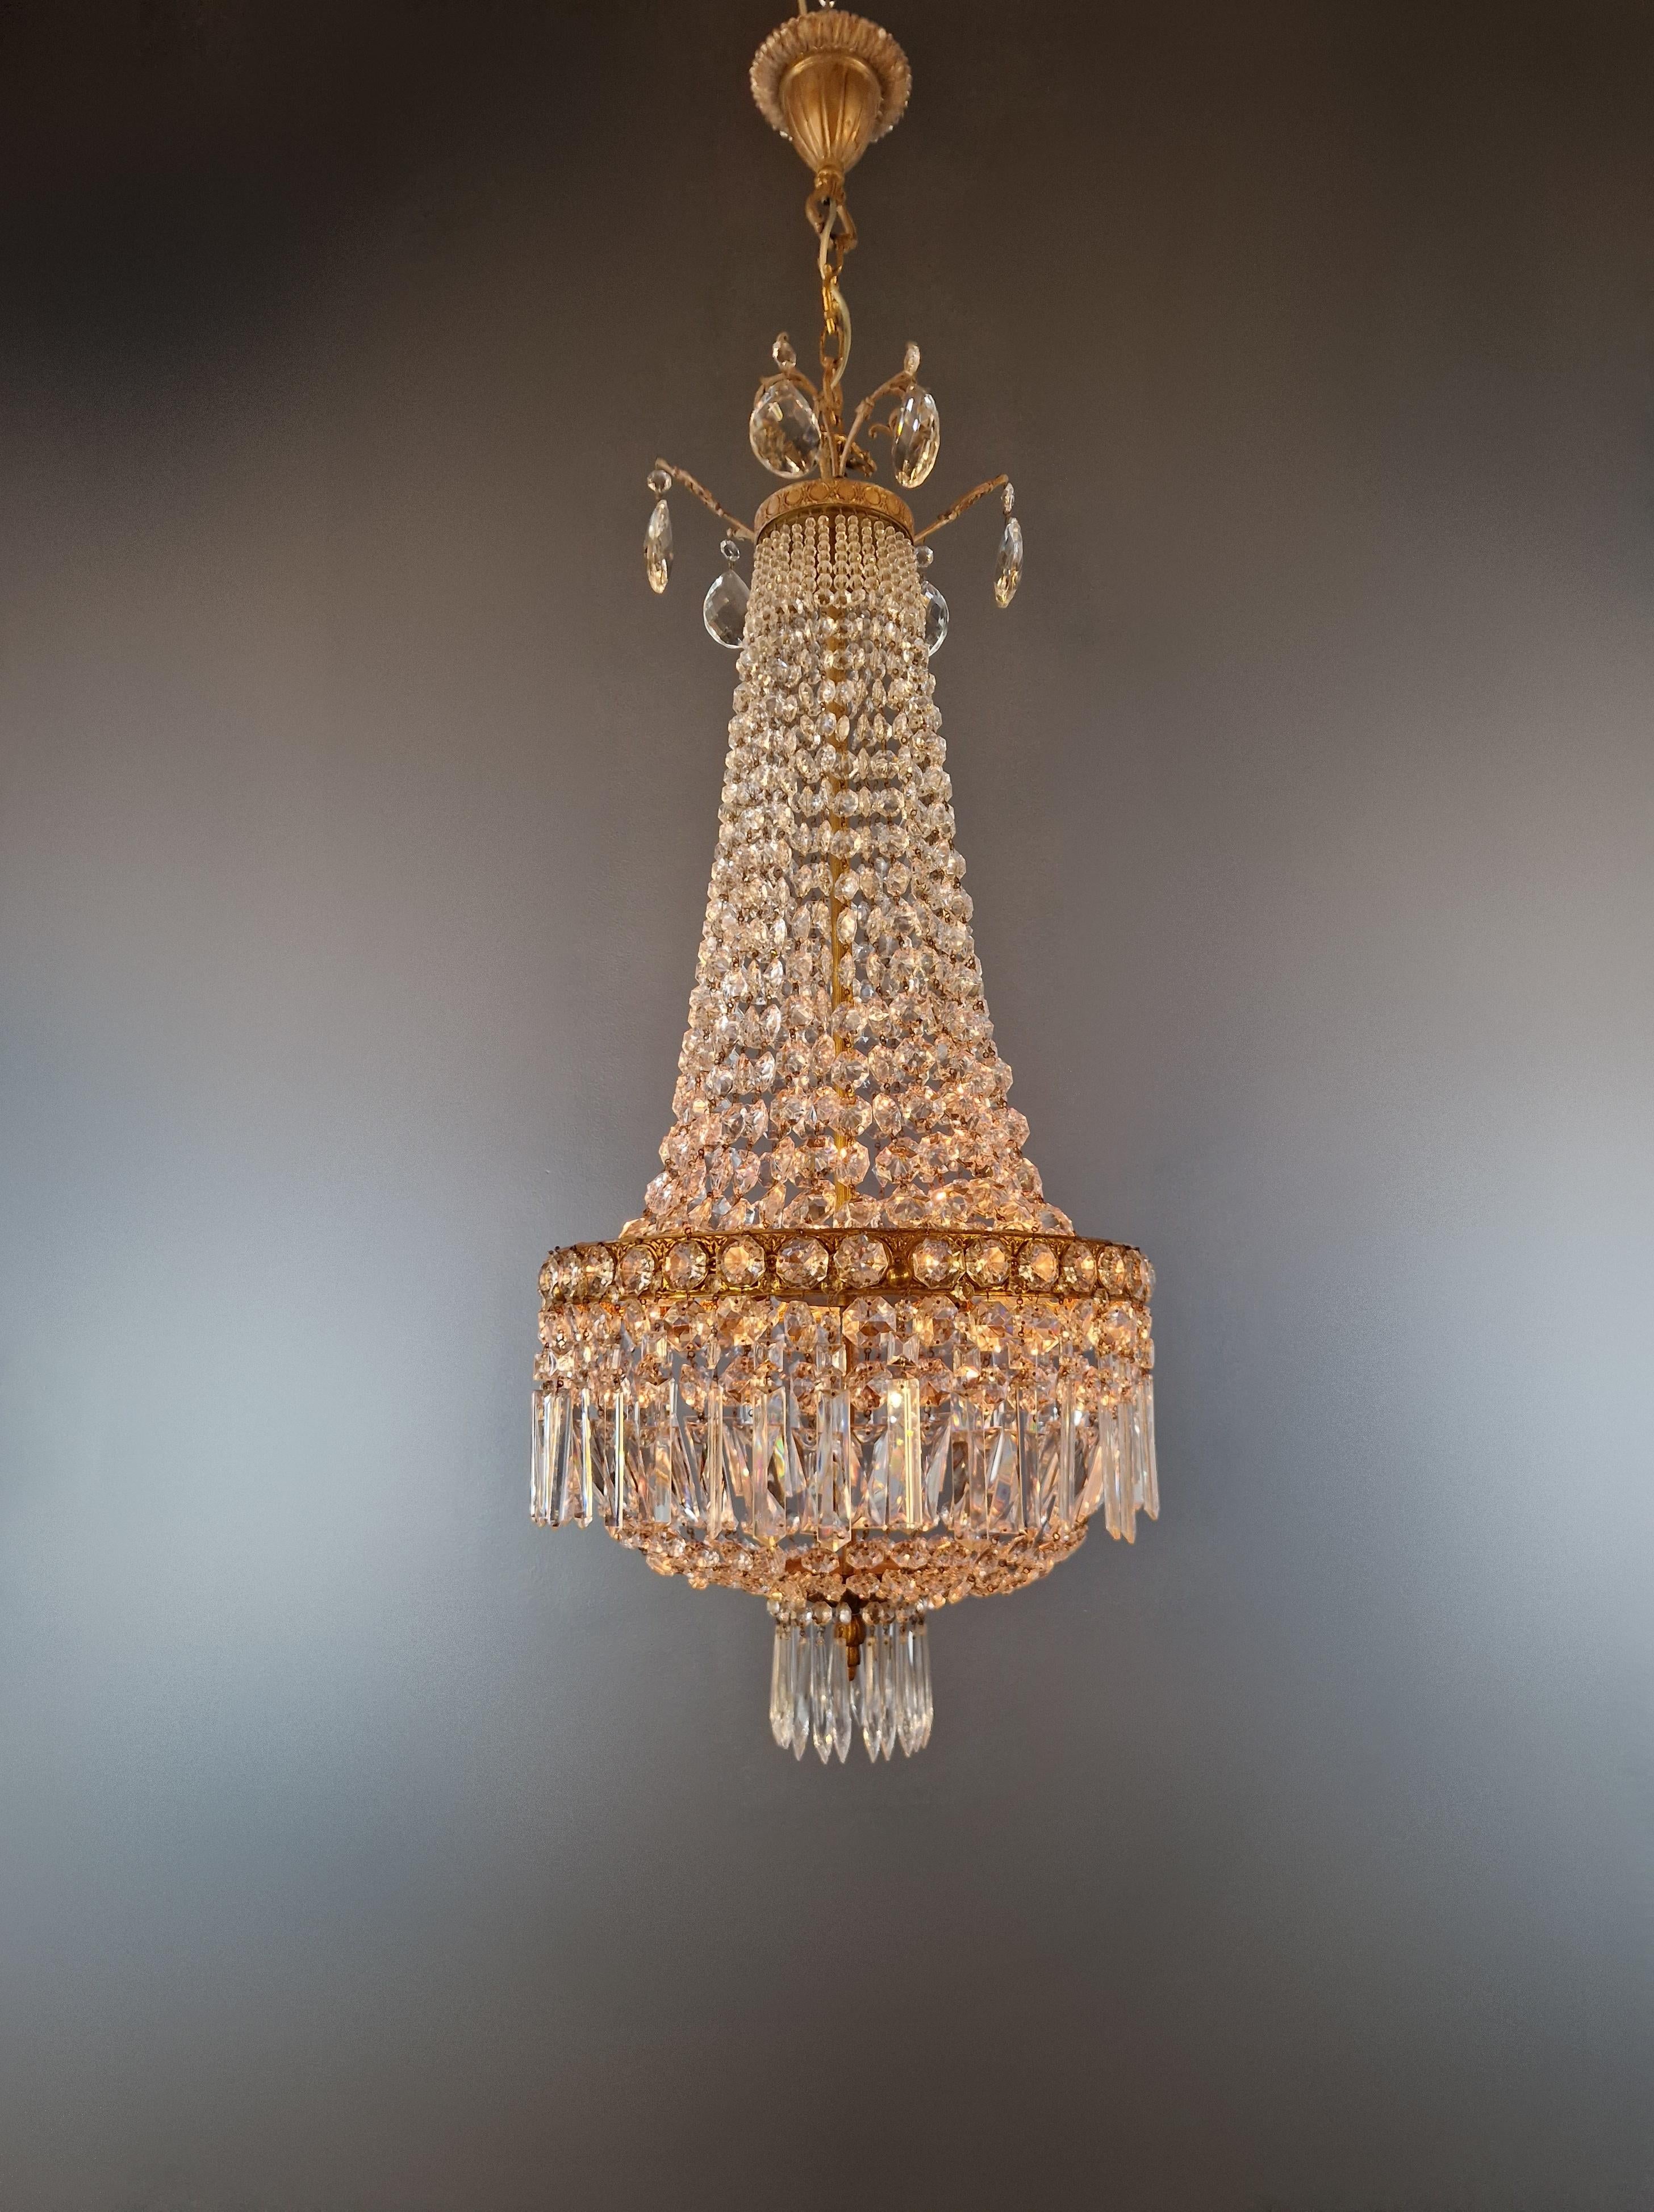 Introducing our exquisite antique chandelier - a masterpiece of elegance and style that will seamlessly complement any room with a touch of timeless beauty. With its stunning details and compact dimensions, this chandelier will add a touch of luxury